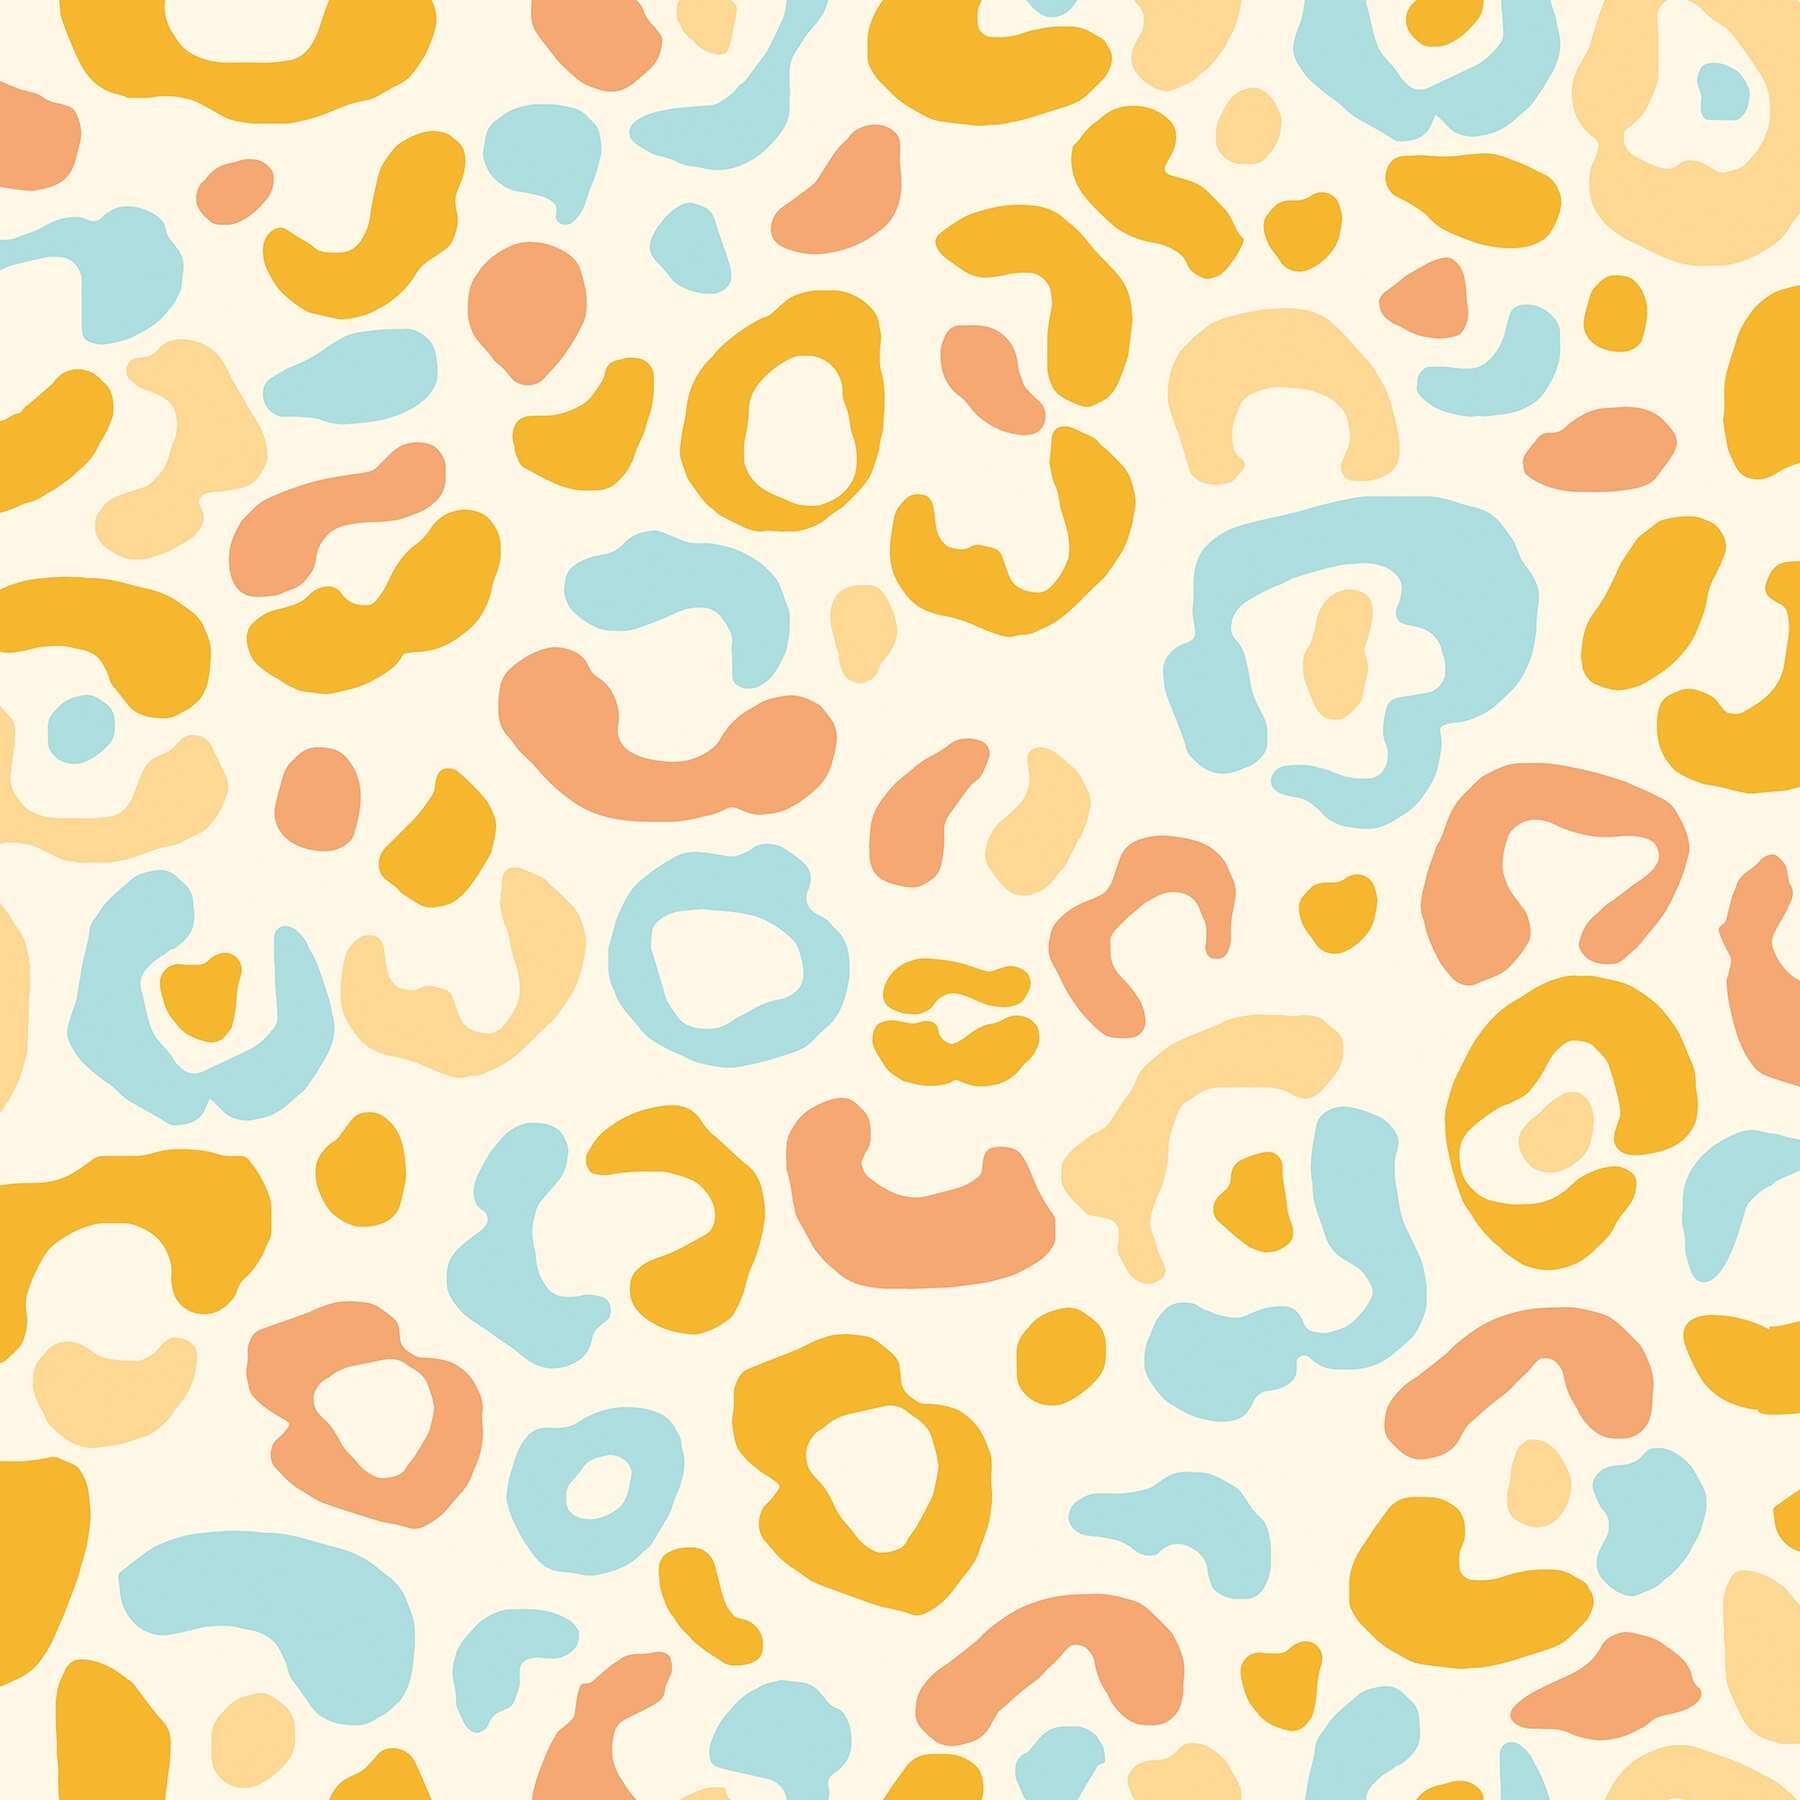 A repeating pattern of abstract leopard spots in pastel colors - Warm